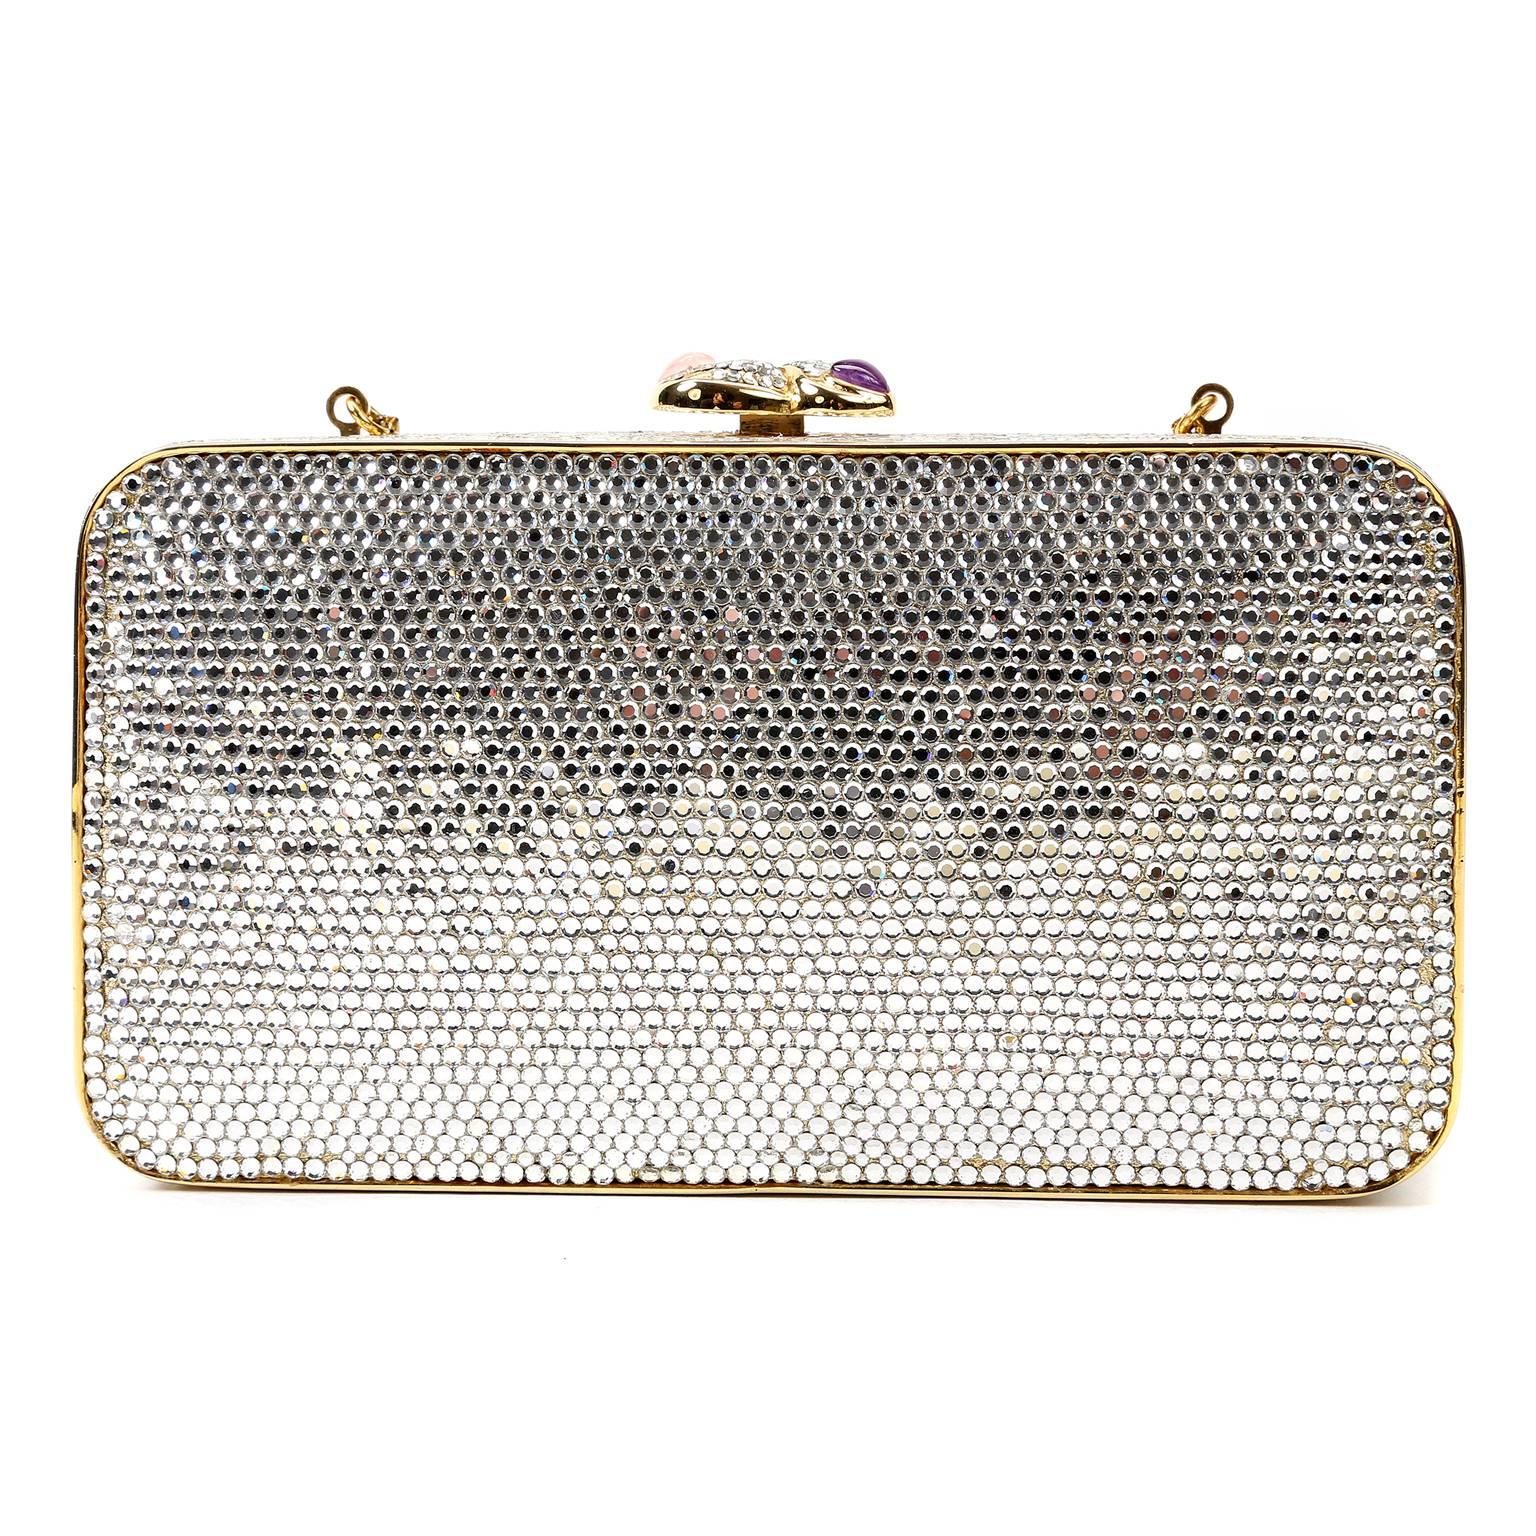 Judith Leiber Crystal Hearts Evening Bag In New Condition For Sale In Malibu, CA